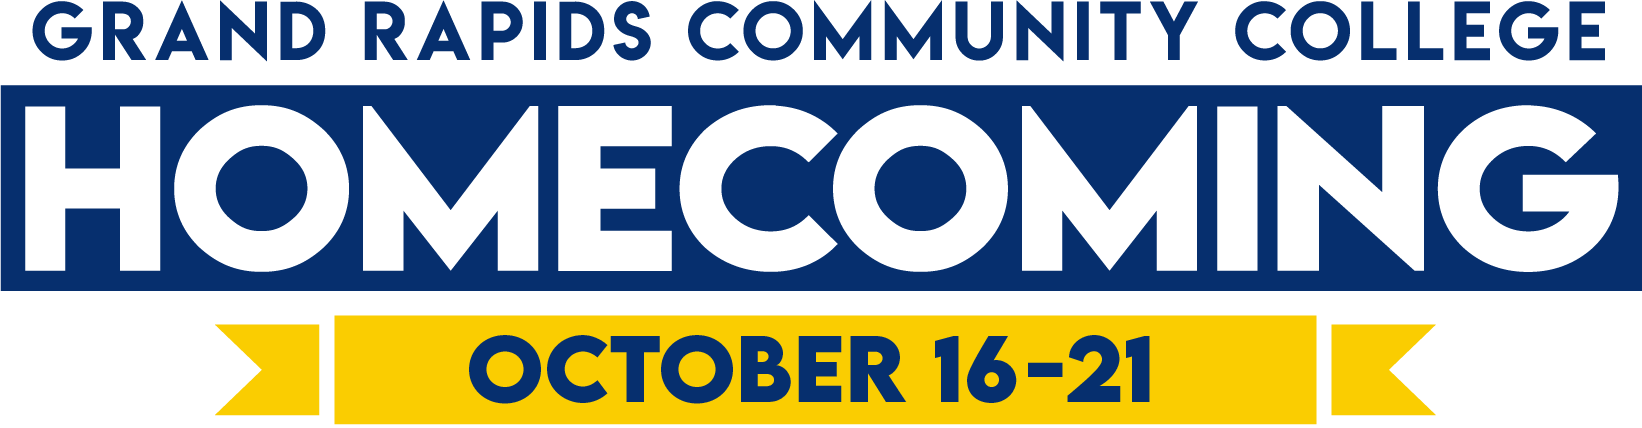 Grand Rapids Community College Homecoming October 16-21